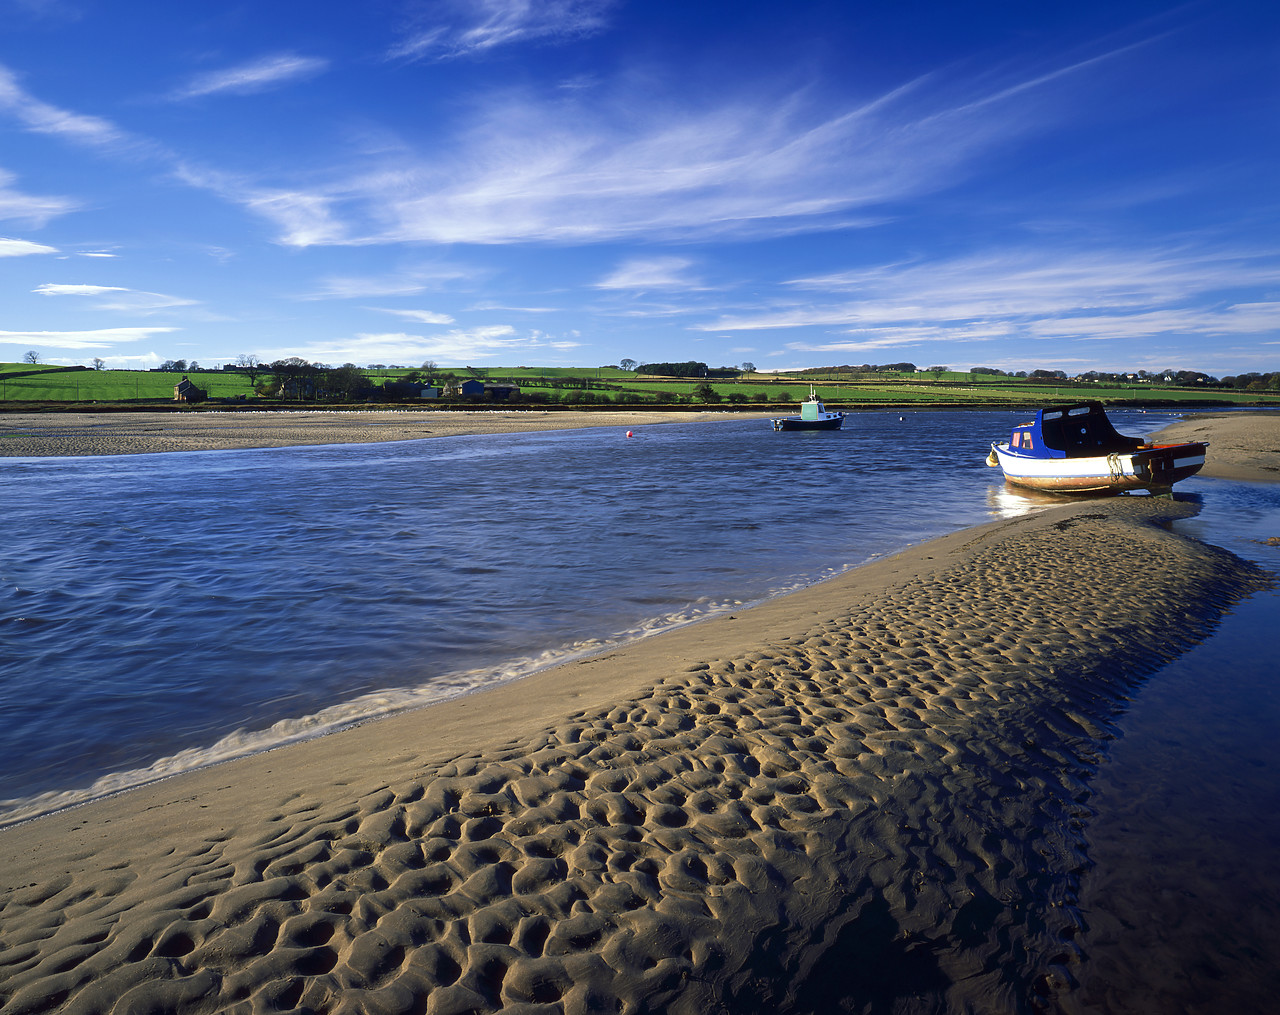 #010381-1 - Boats at Low Tide, Alnmouth, Northumberland, England